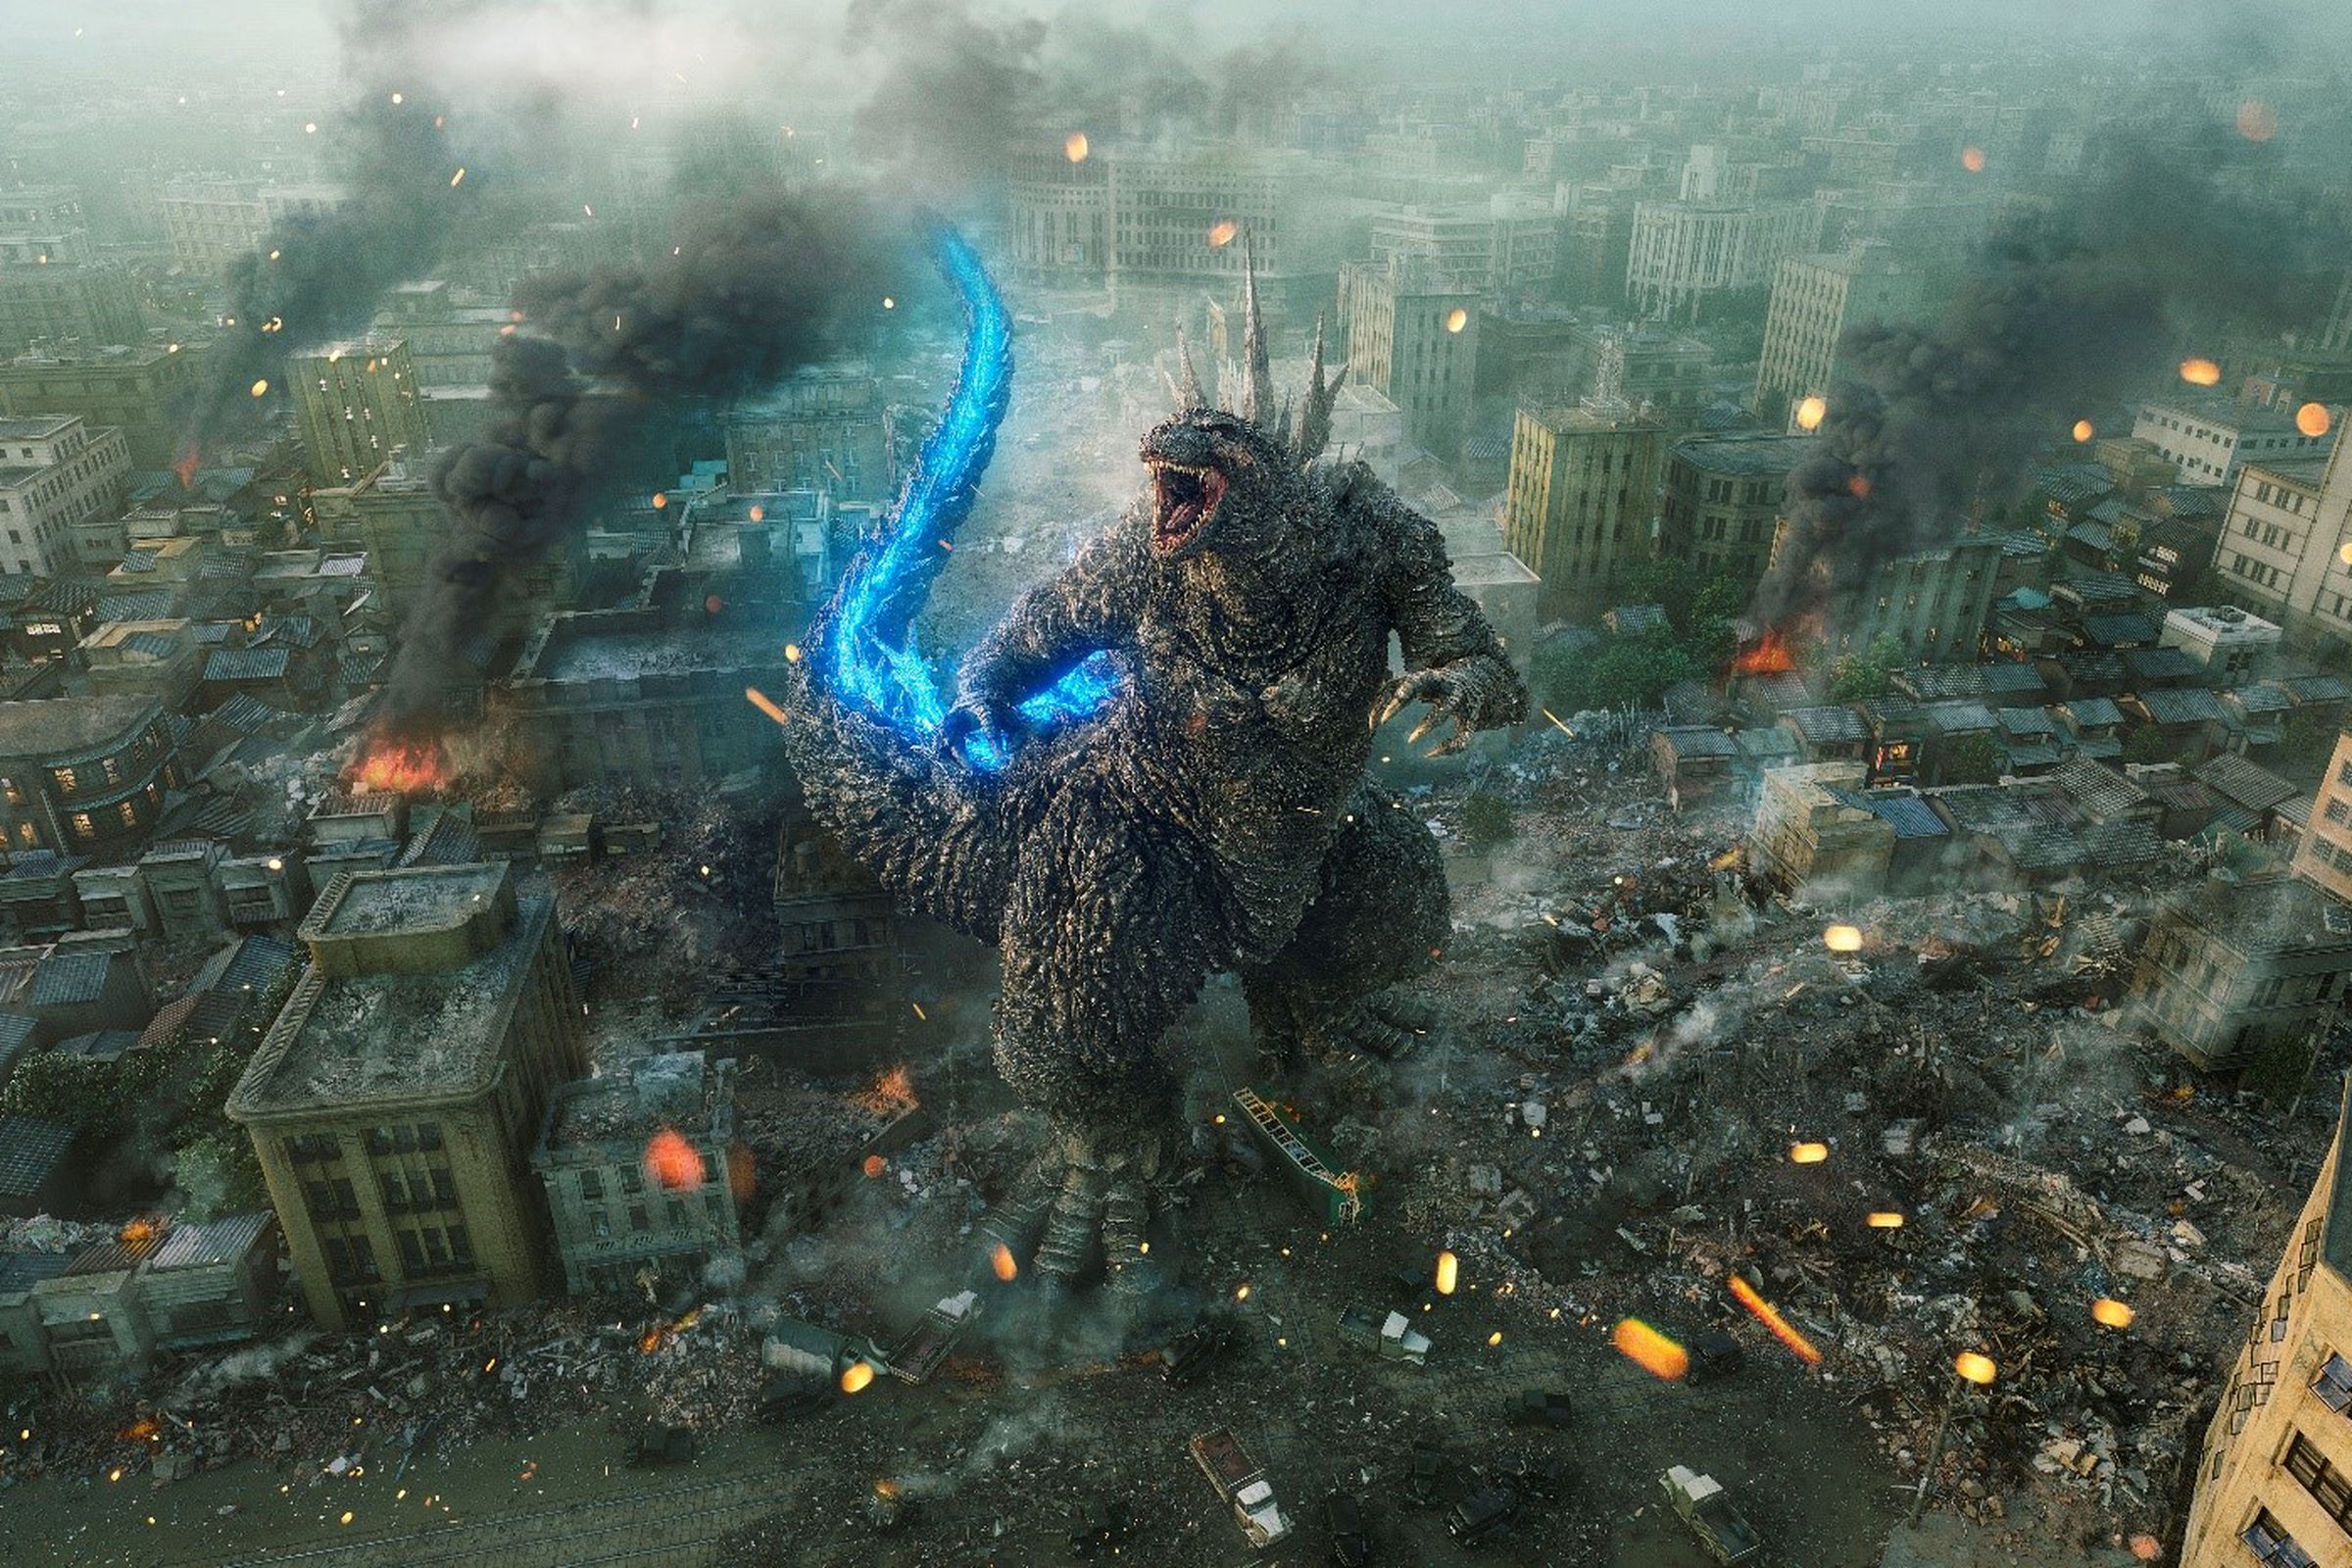 A wide, aerial shot of a gargantuan, upright, dinosaur-like creature roaring up into the sky as a ruined city smolders around it.